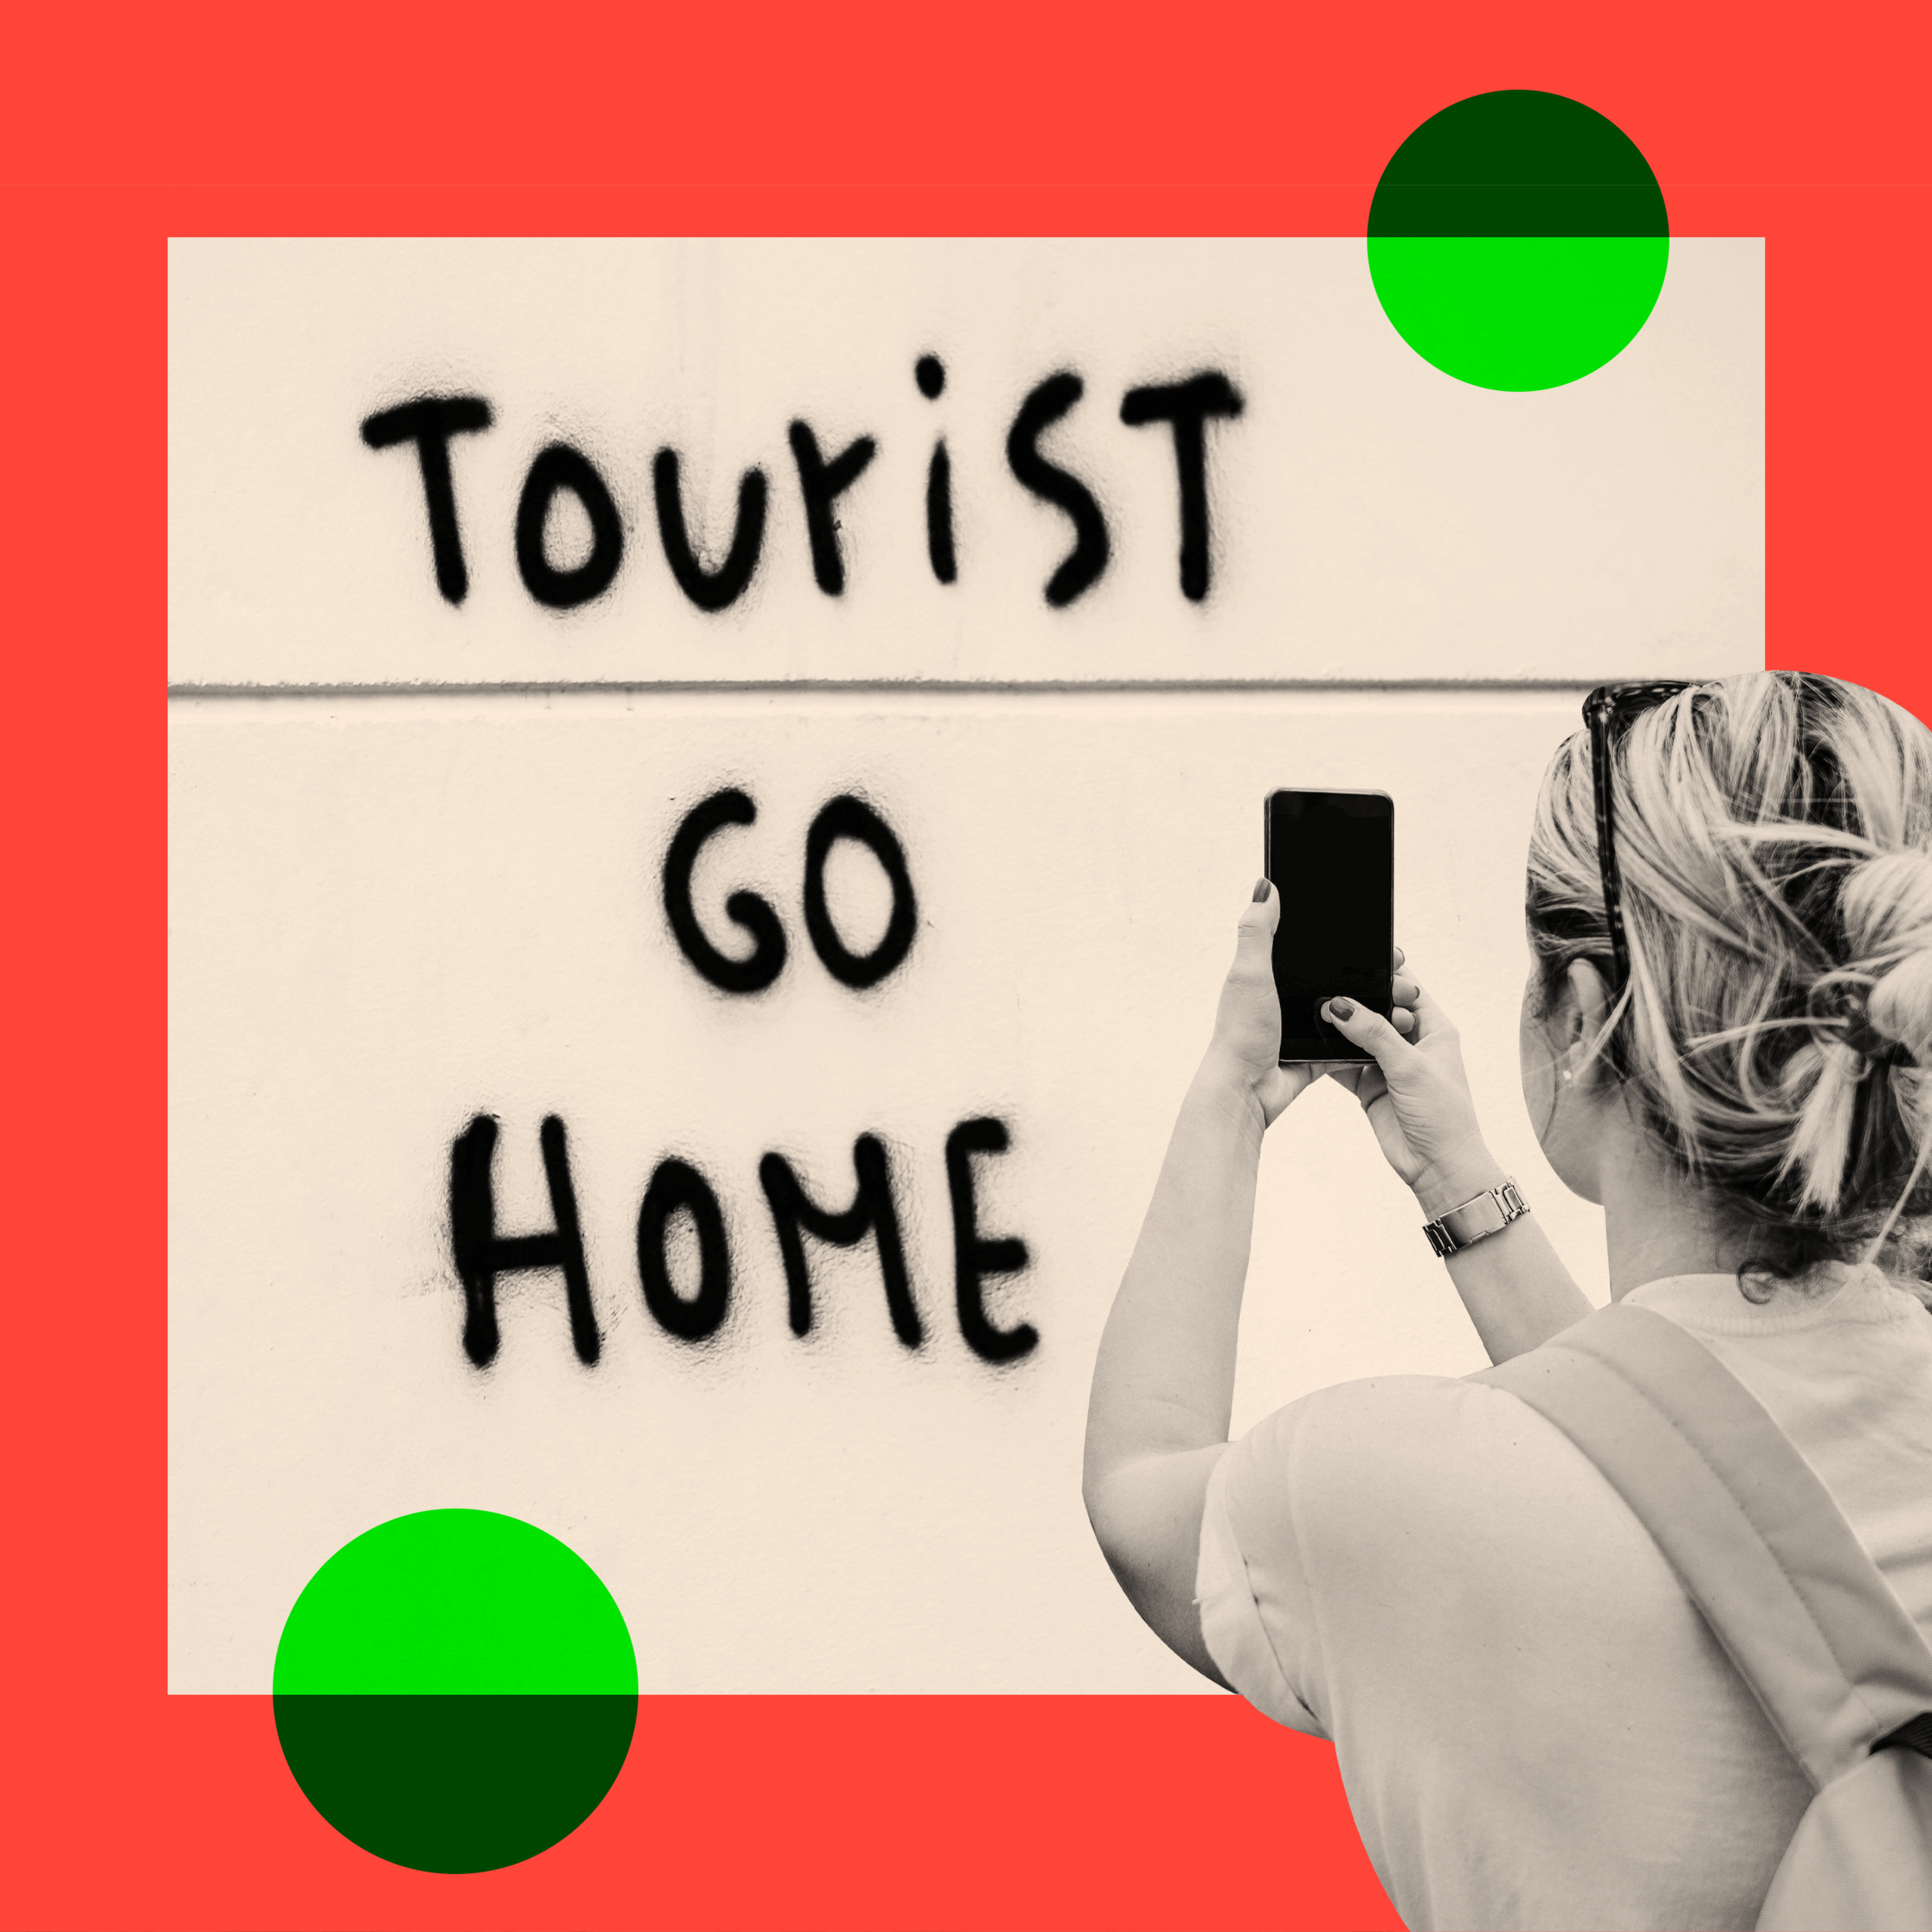 A sign that reads "tourist go home" and a woman photographing it